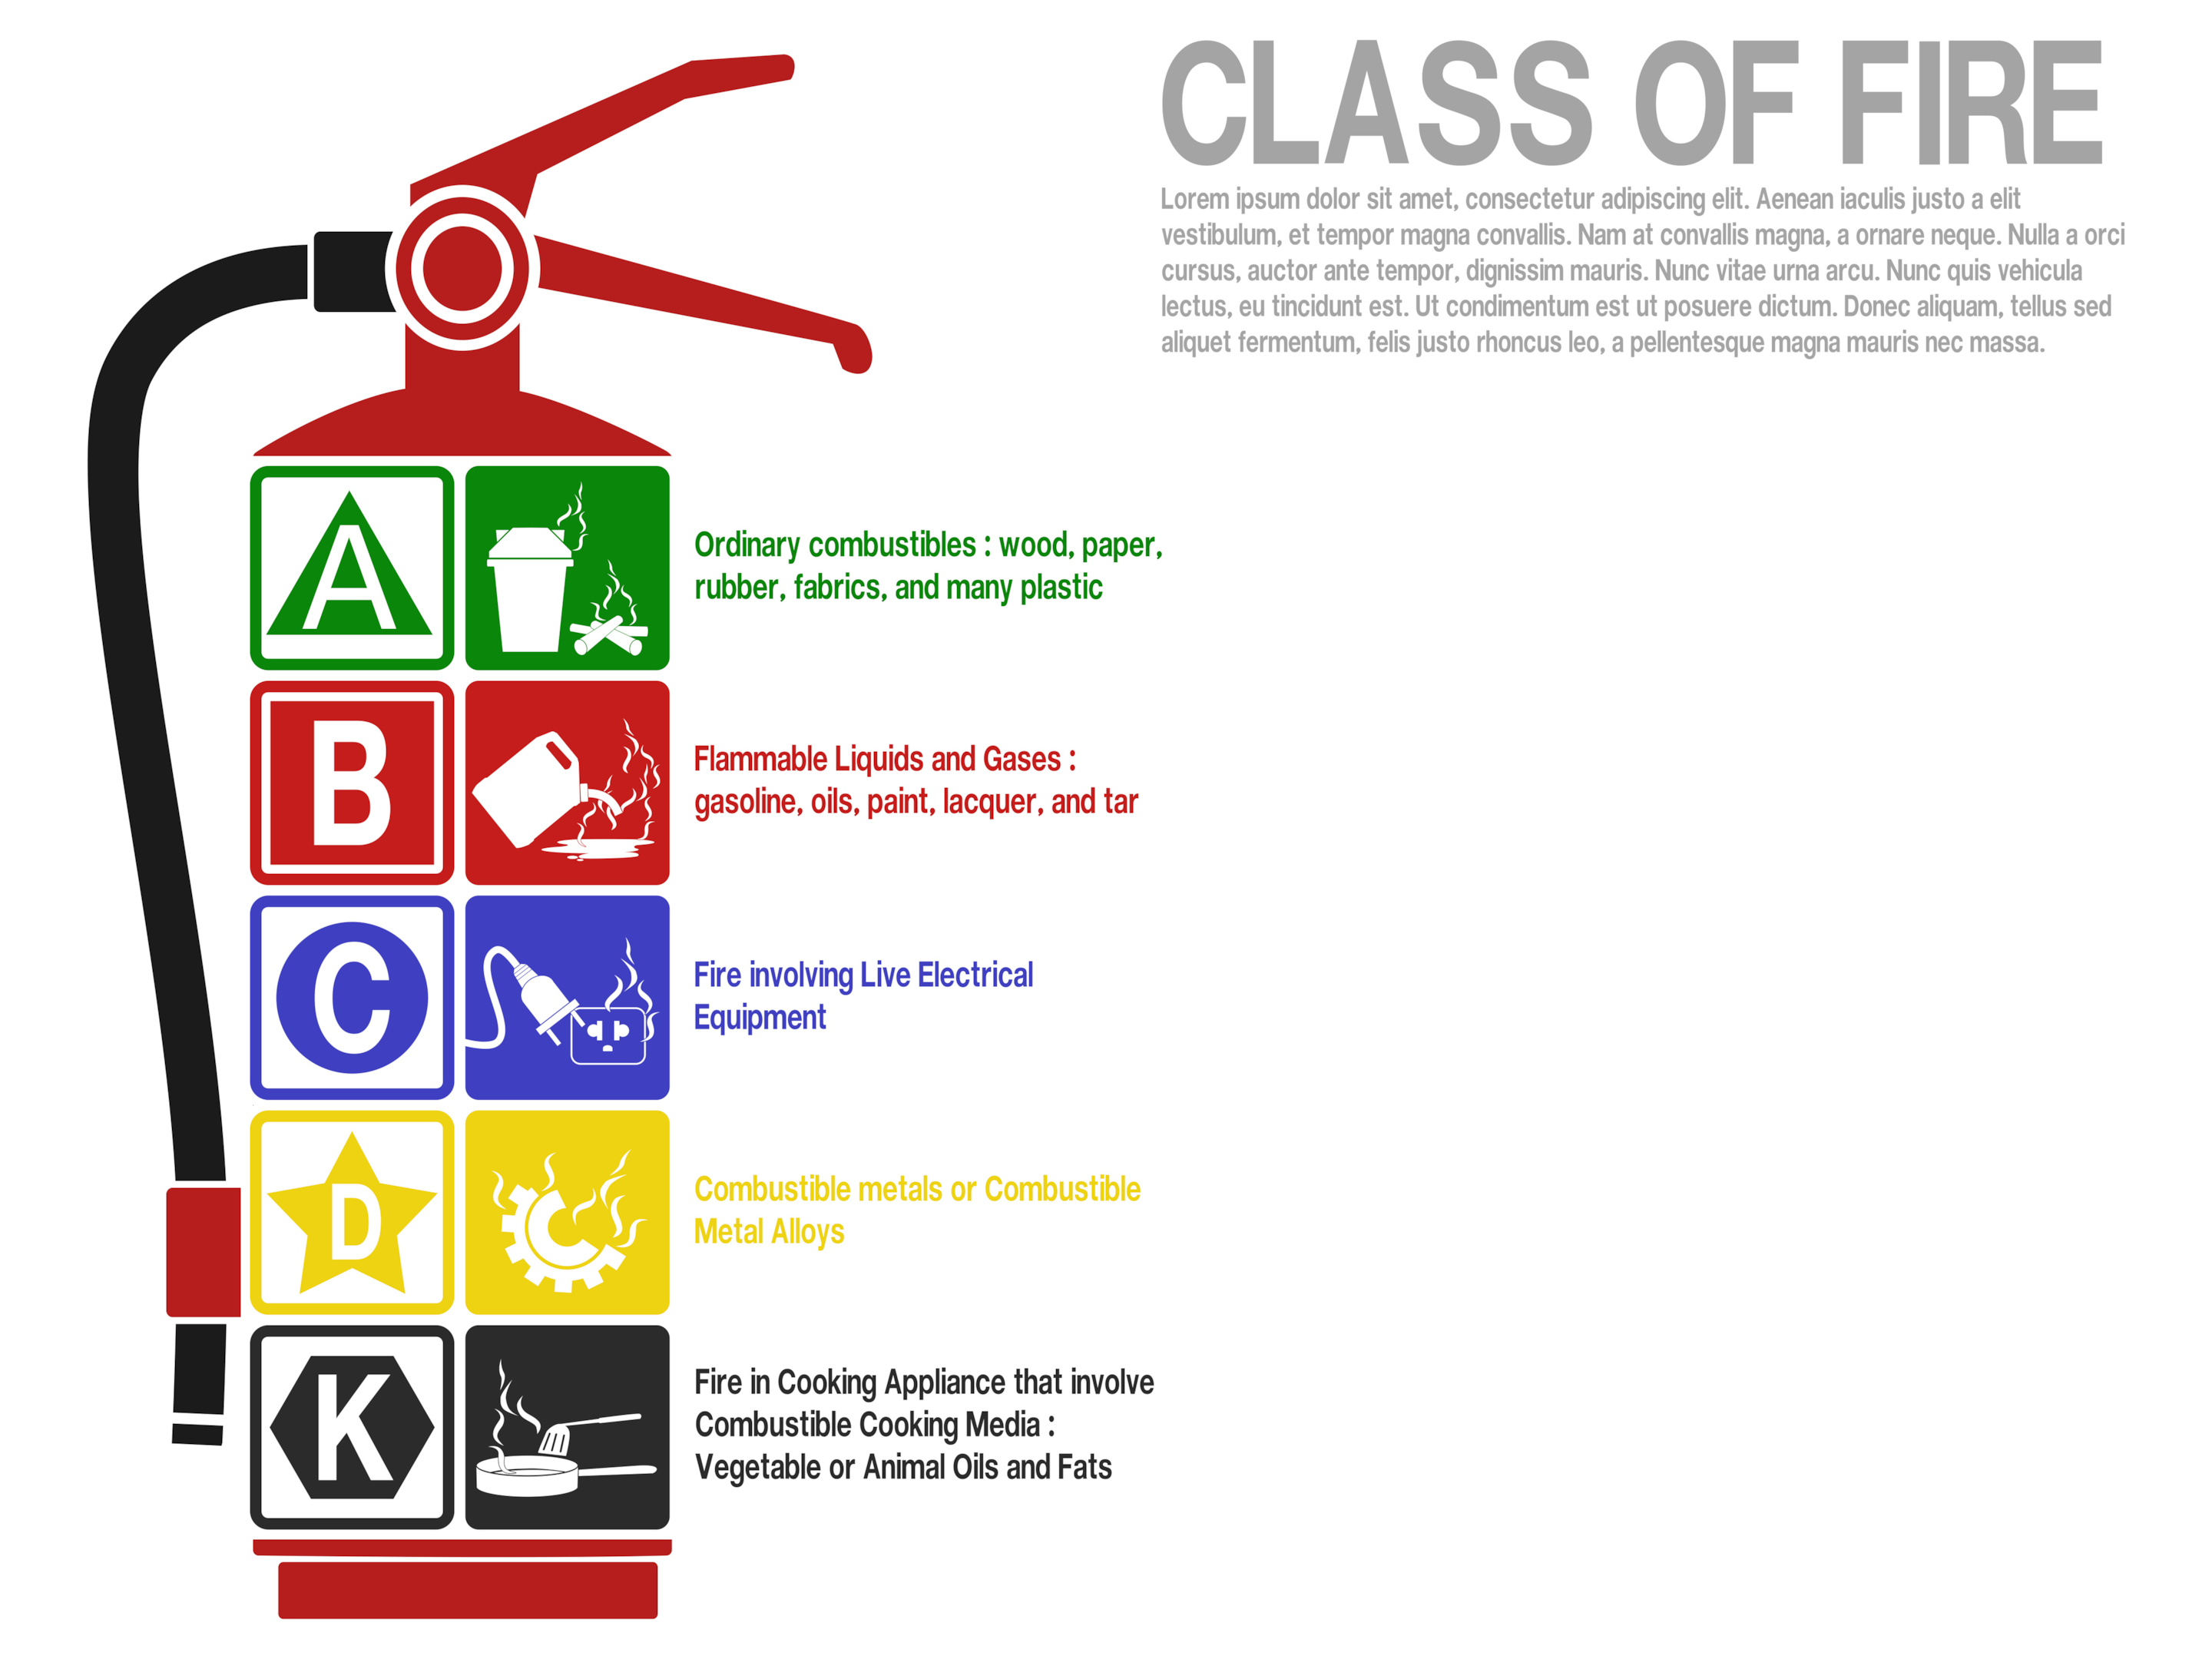 Fire and their classes